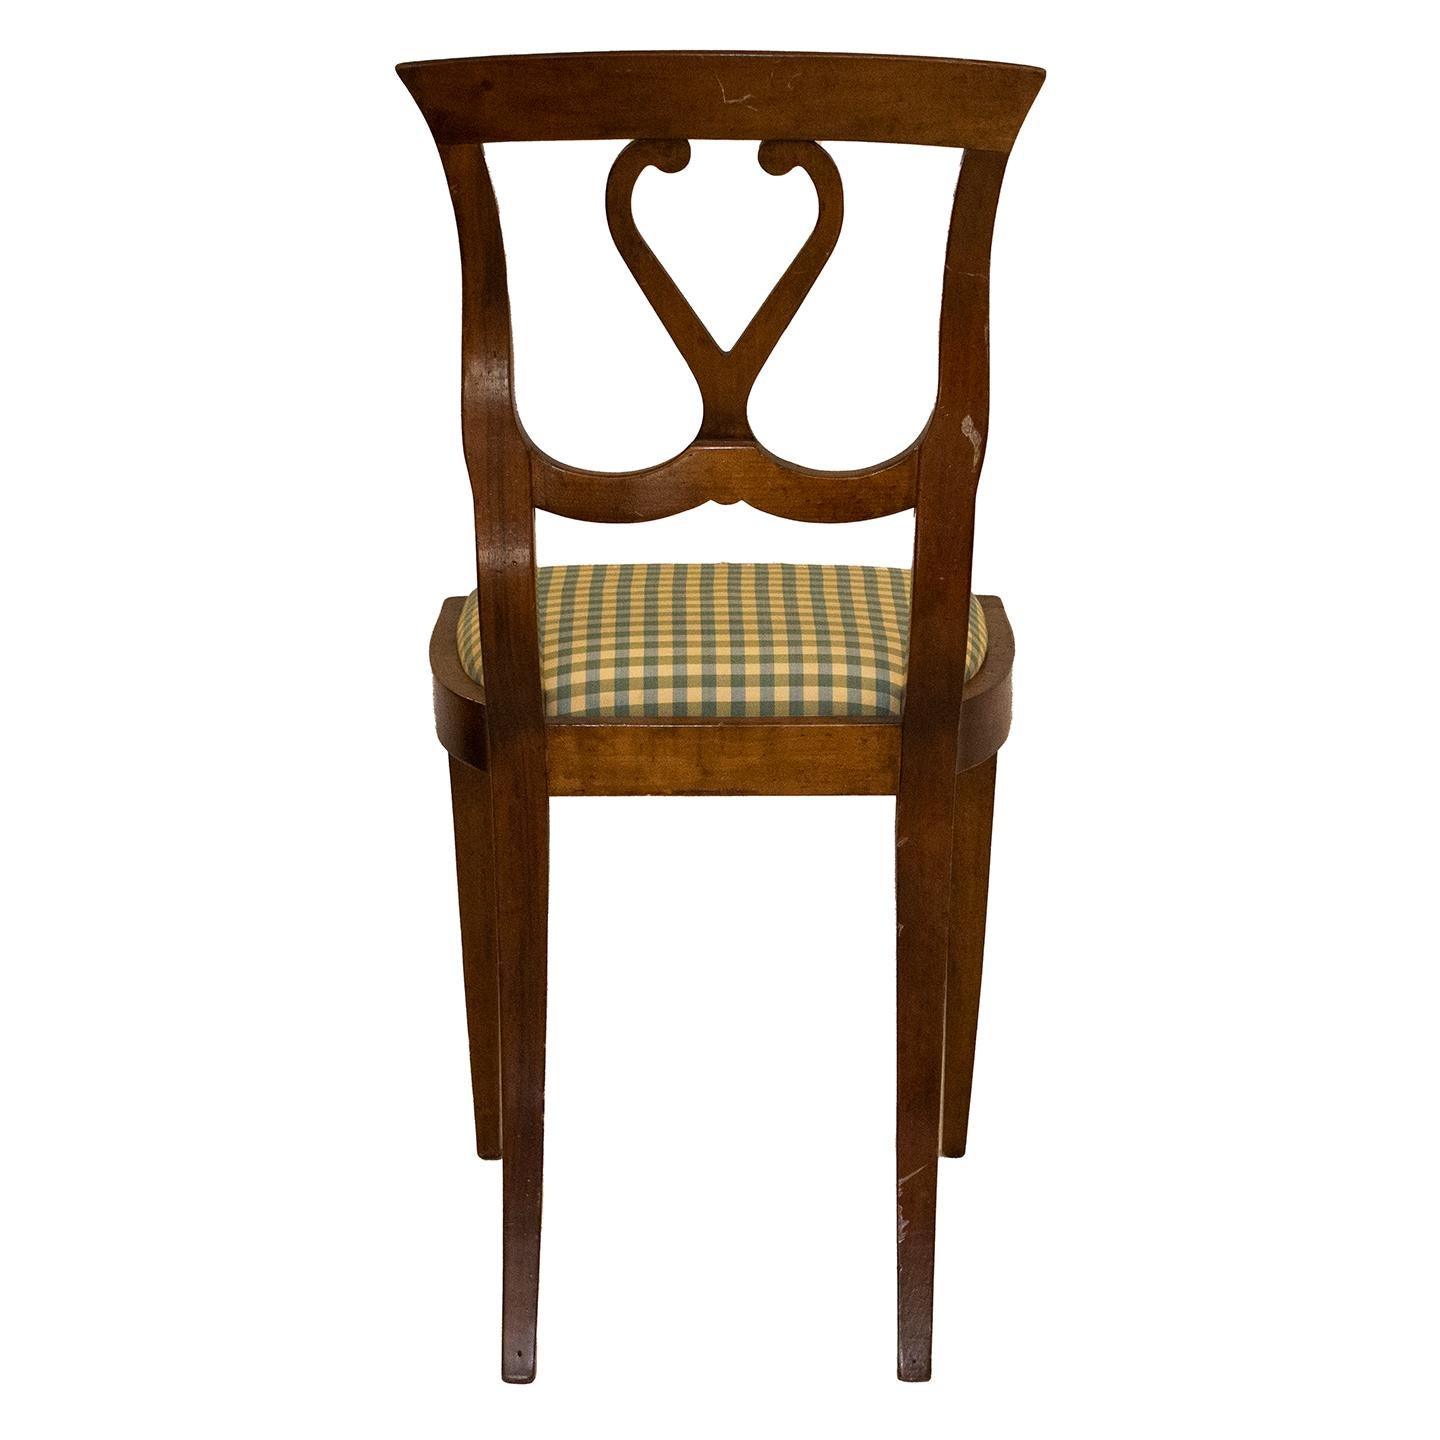 Mid-20th Century Vintage French Single Chair